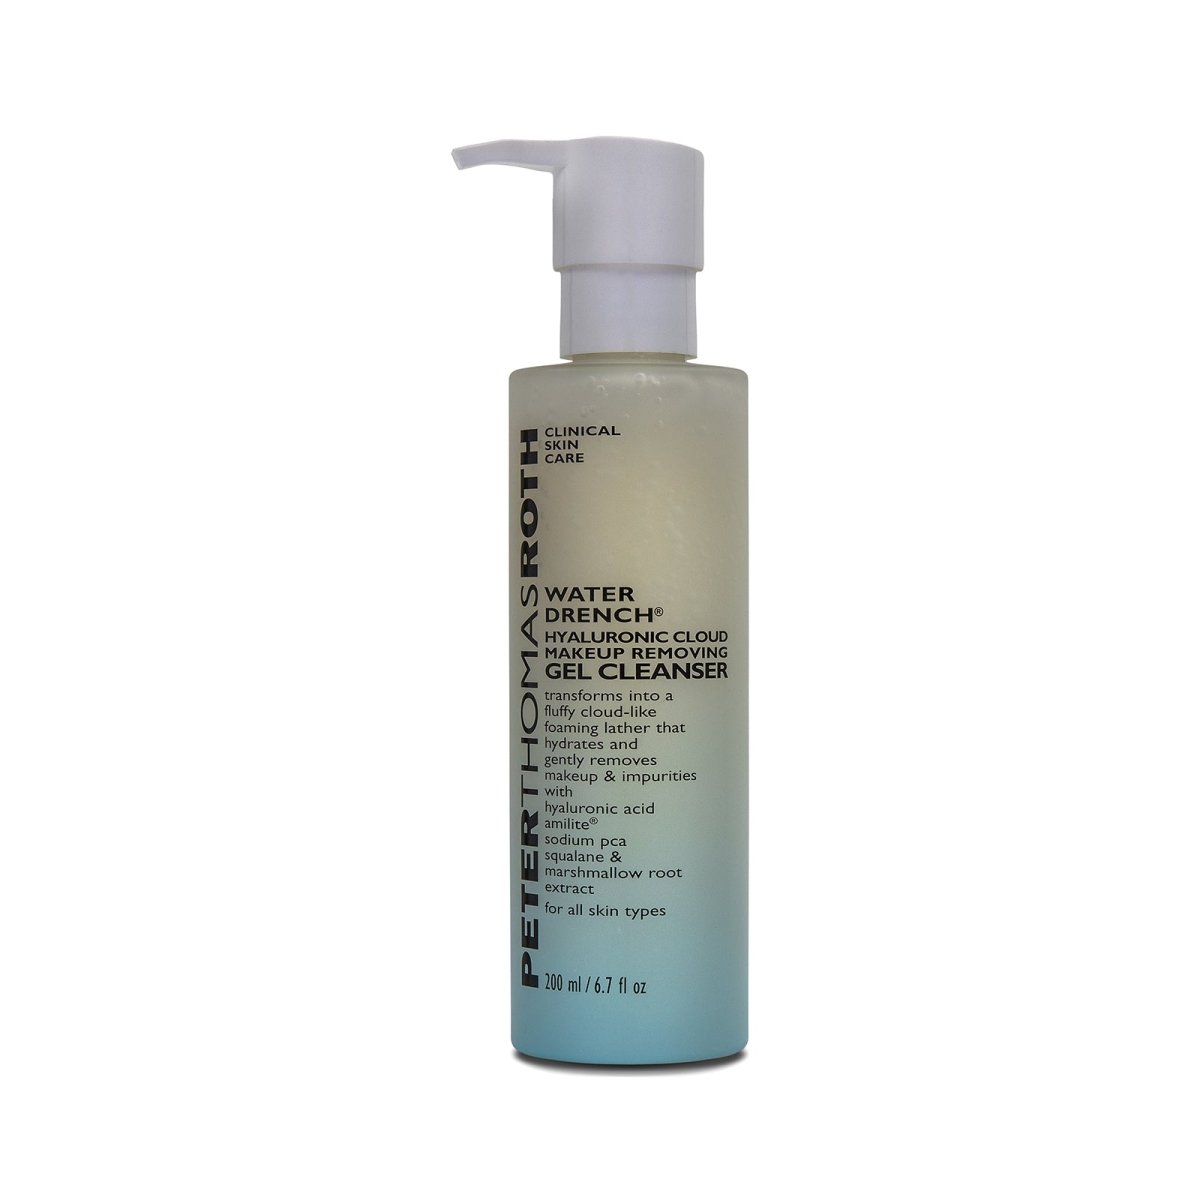 Peter Thomas Roth Water Drench? Hyaluronic Cloud Makeup Removing Gel Cleanser